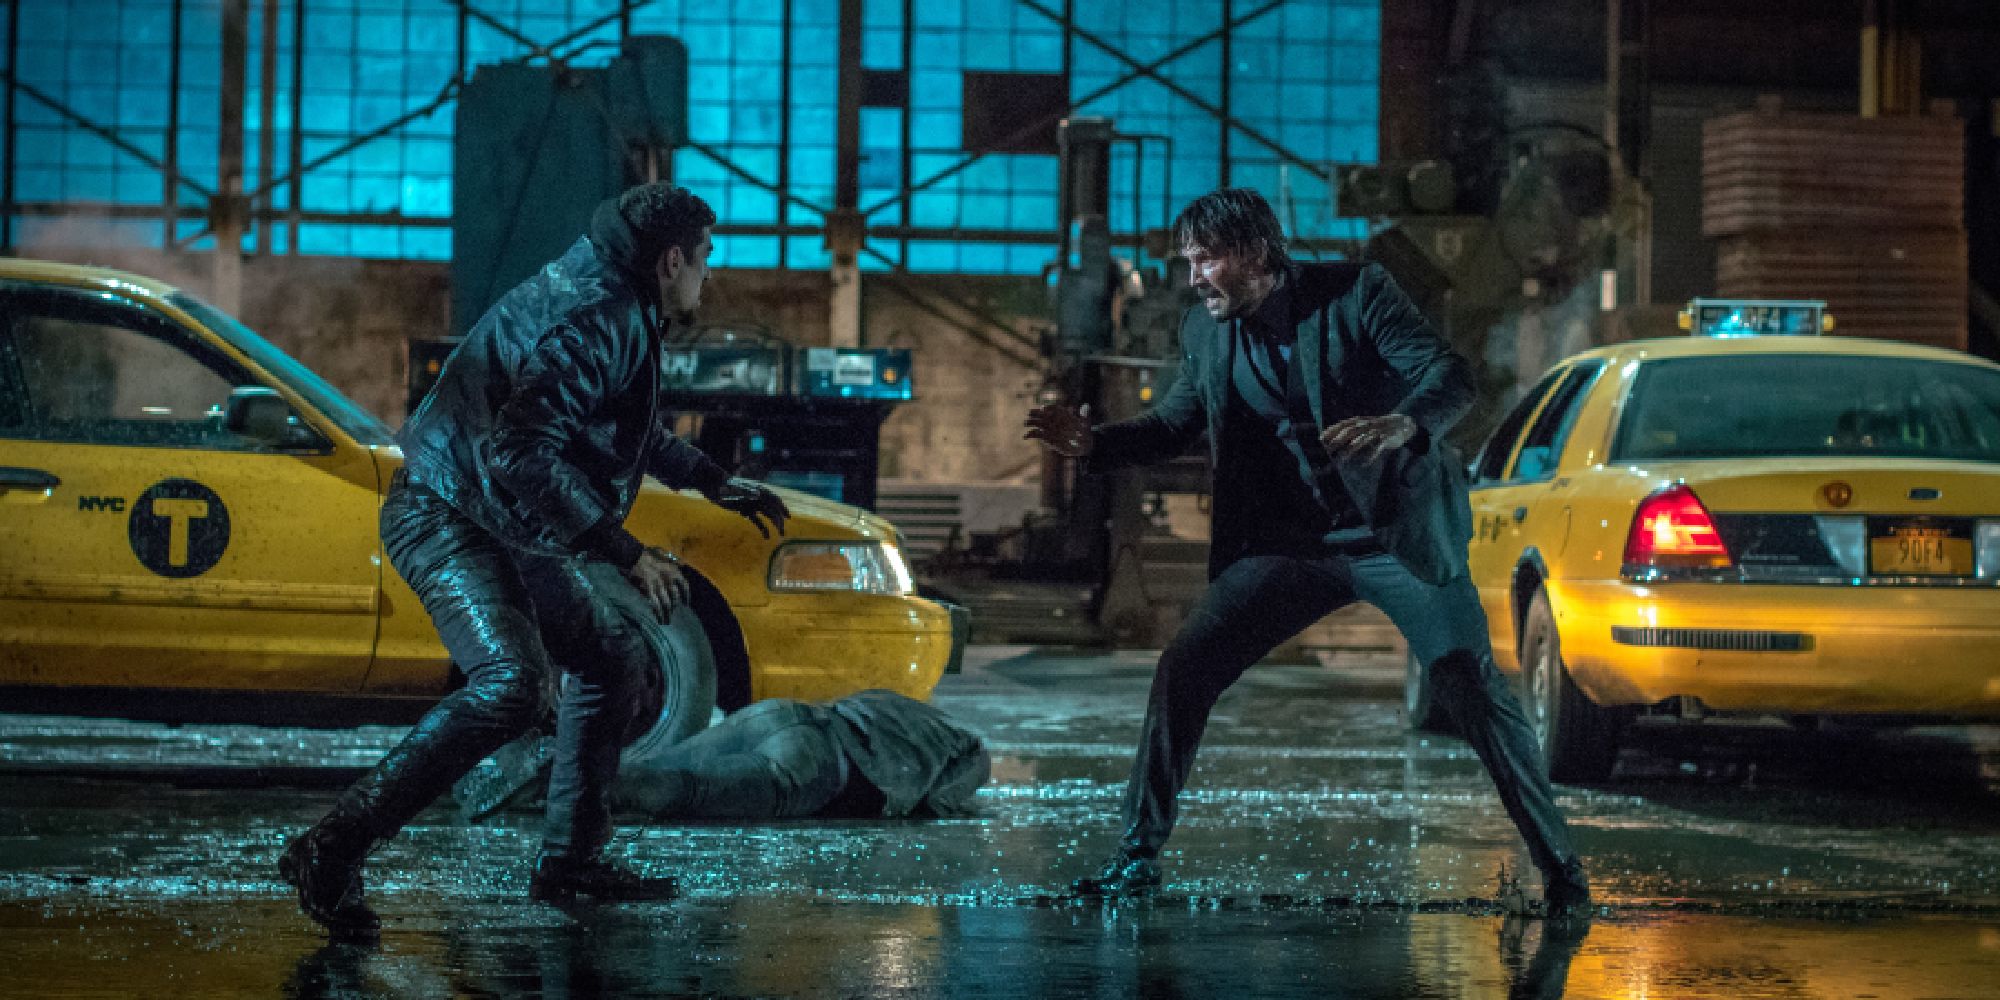 John Wick fights another man in John Wick Chapter 2.